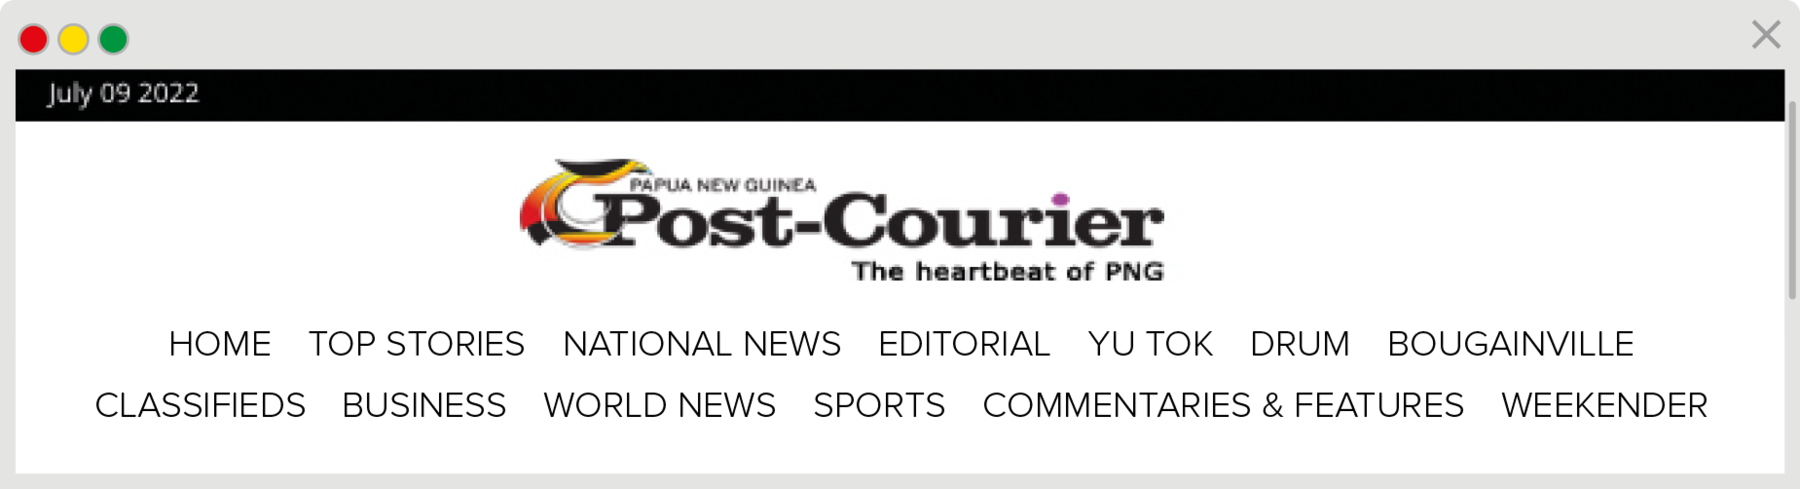 Reprodução de página da internet. Na parte superior, título: Papua New Guinea, Post-Courier, The heartbeat of PNG. Na parte inferior, menus: HOME, TOP STORIES, NATIONAL NEWS, EDITORIAL, YU TOK, DRUM, BOUGAINVILLE, CLASSIFIEDS, BUSINESS, WORLD NEWS, SPORTS, COMMENTARIES AND  FEATURES, WEEKENDER.